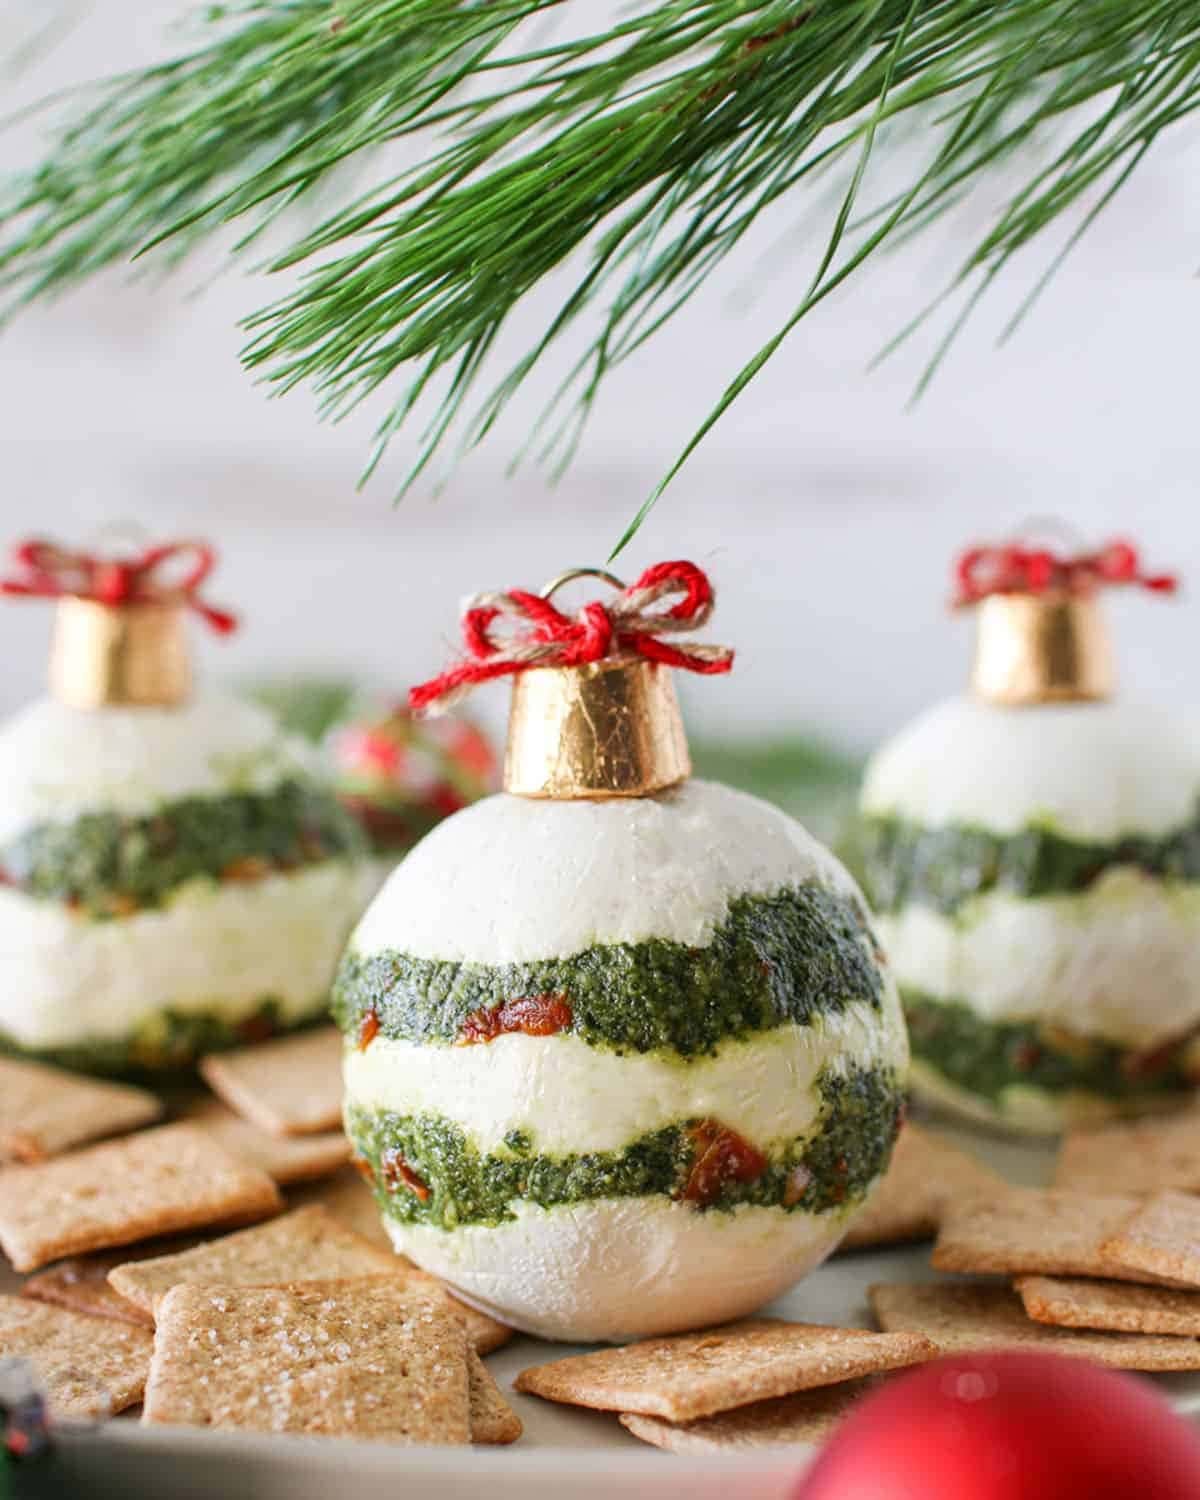 Cheeseballs decorated as ornaments with pesto and sun dried tomato filling. 